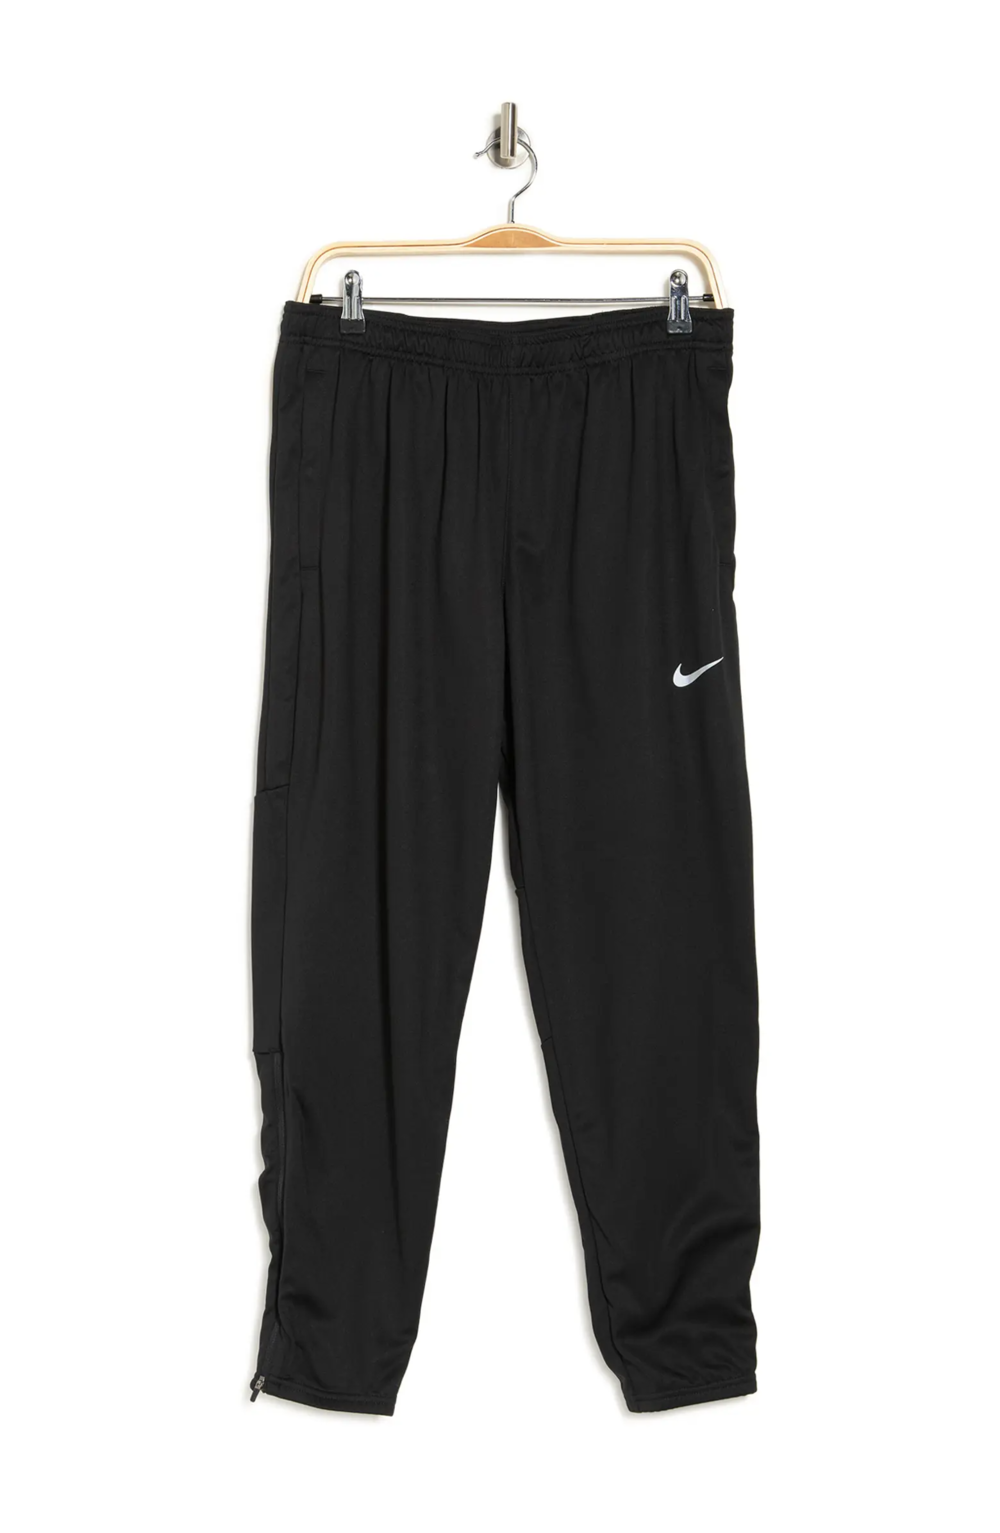 30% OFF the Nike Therma Fit Repel Challenger Pants — Sneaker Shouts